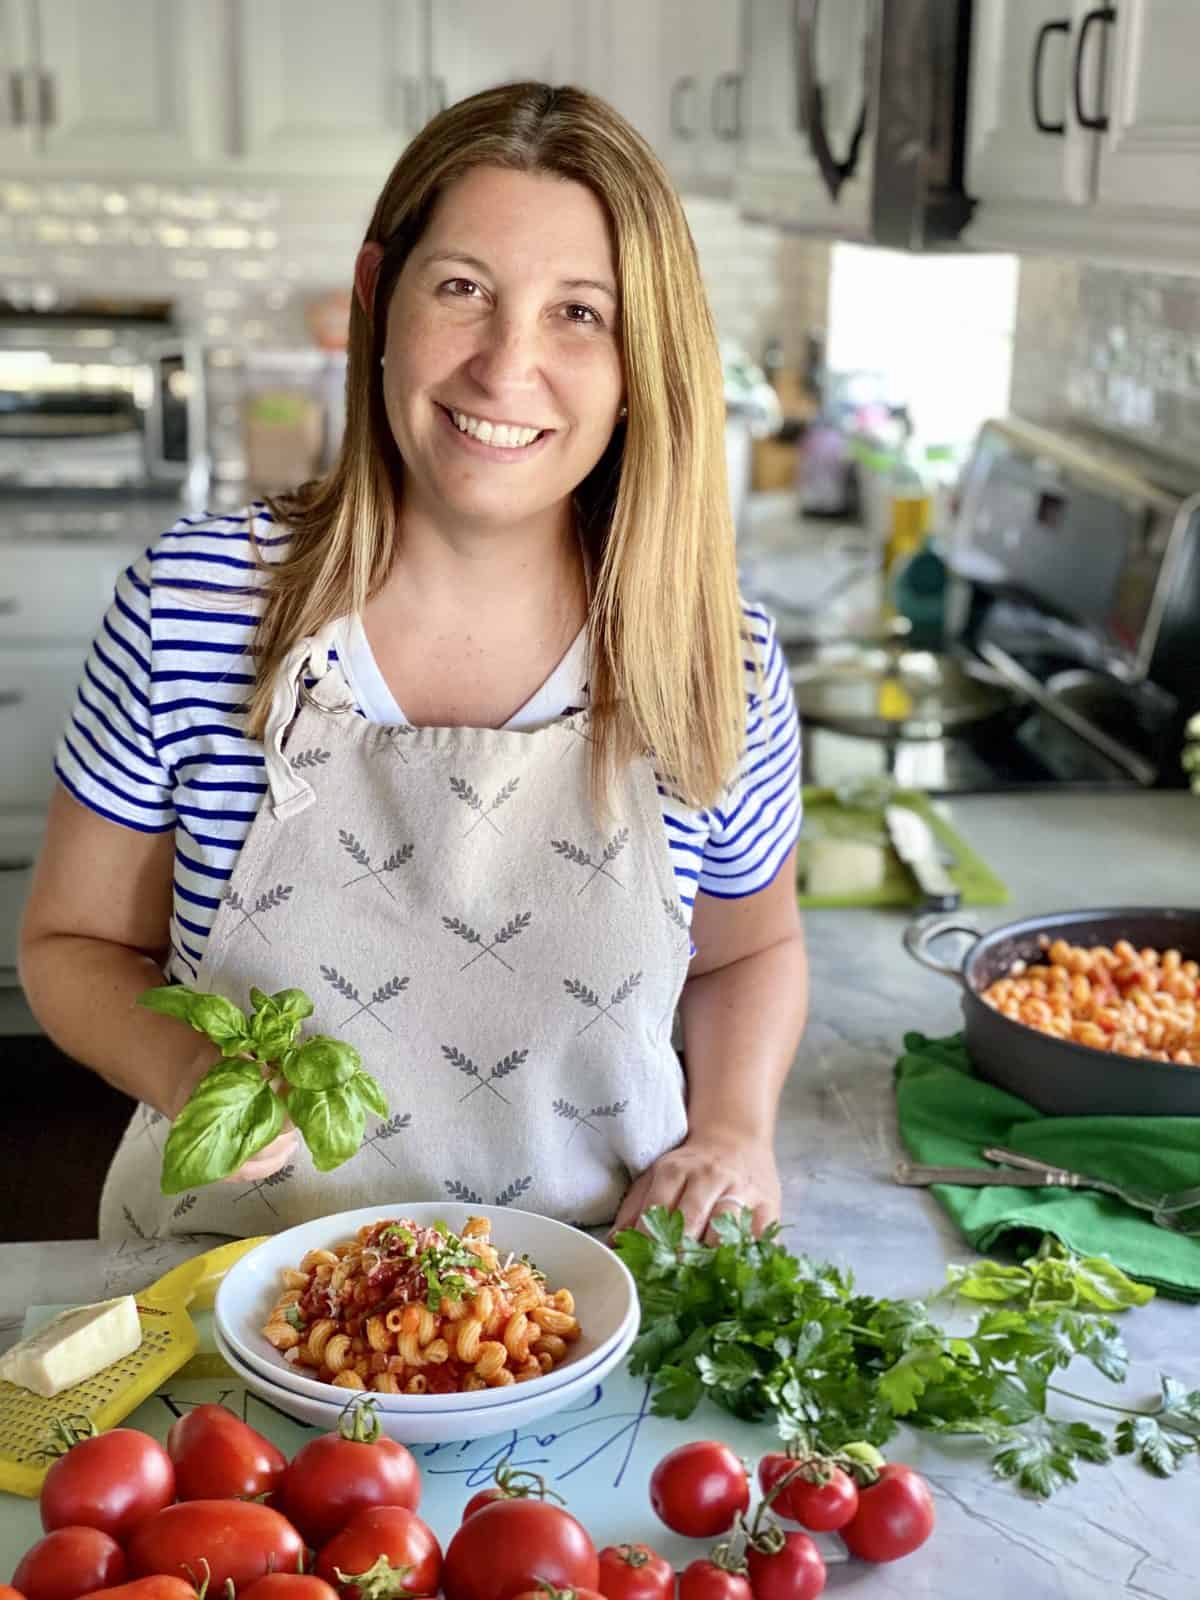 Female in apron holding basil with pasta and tomatoes on counter.